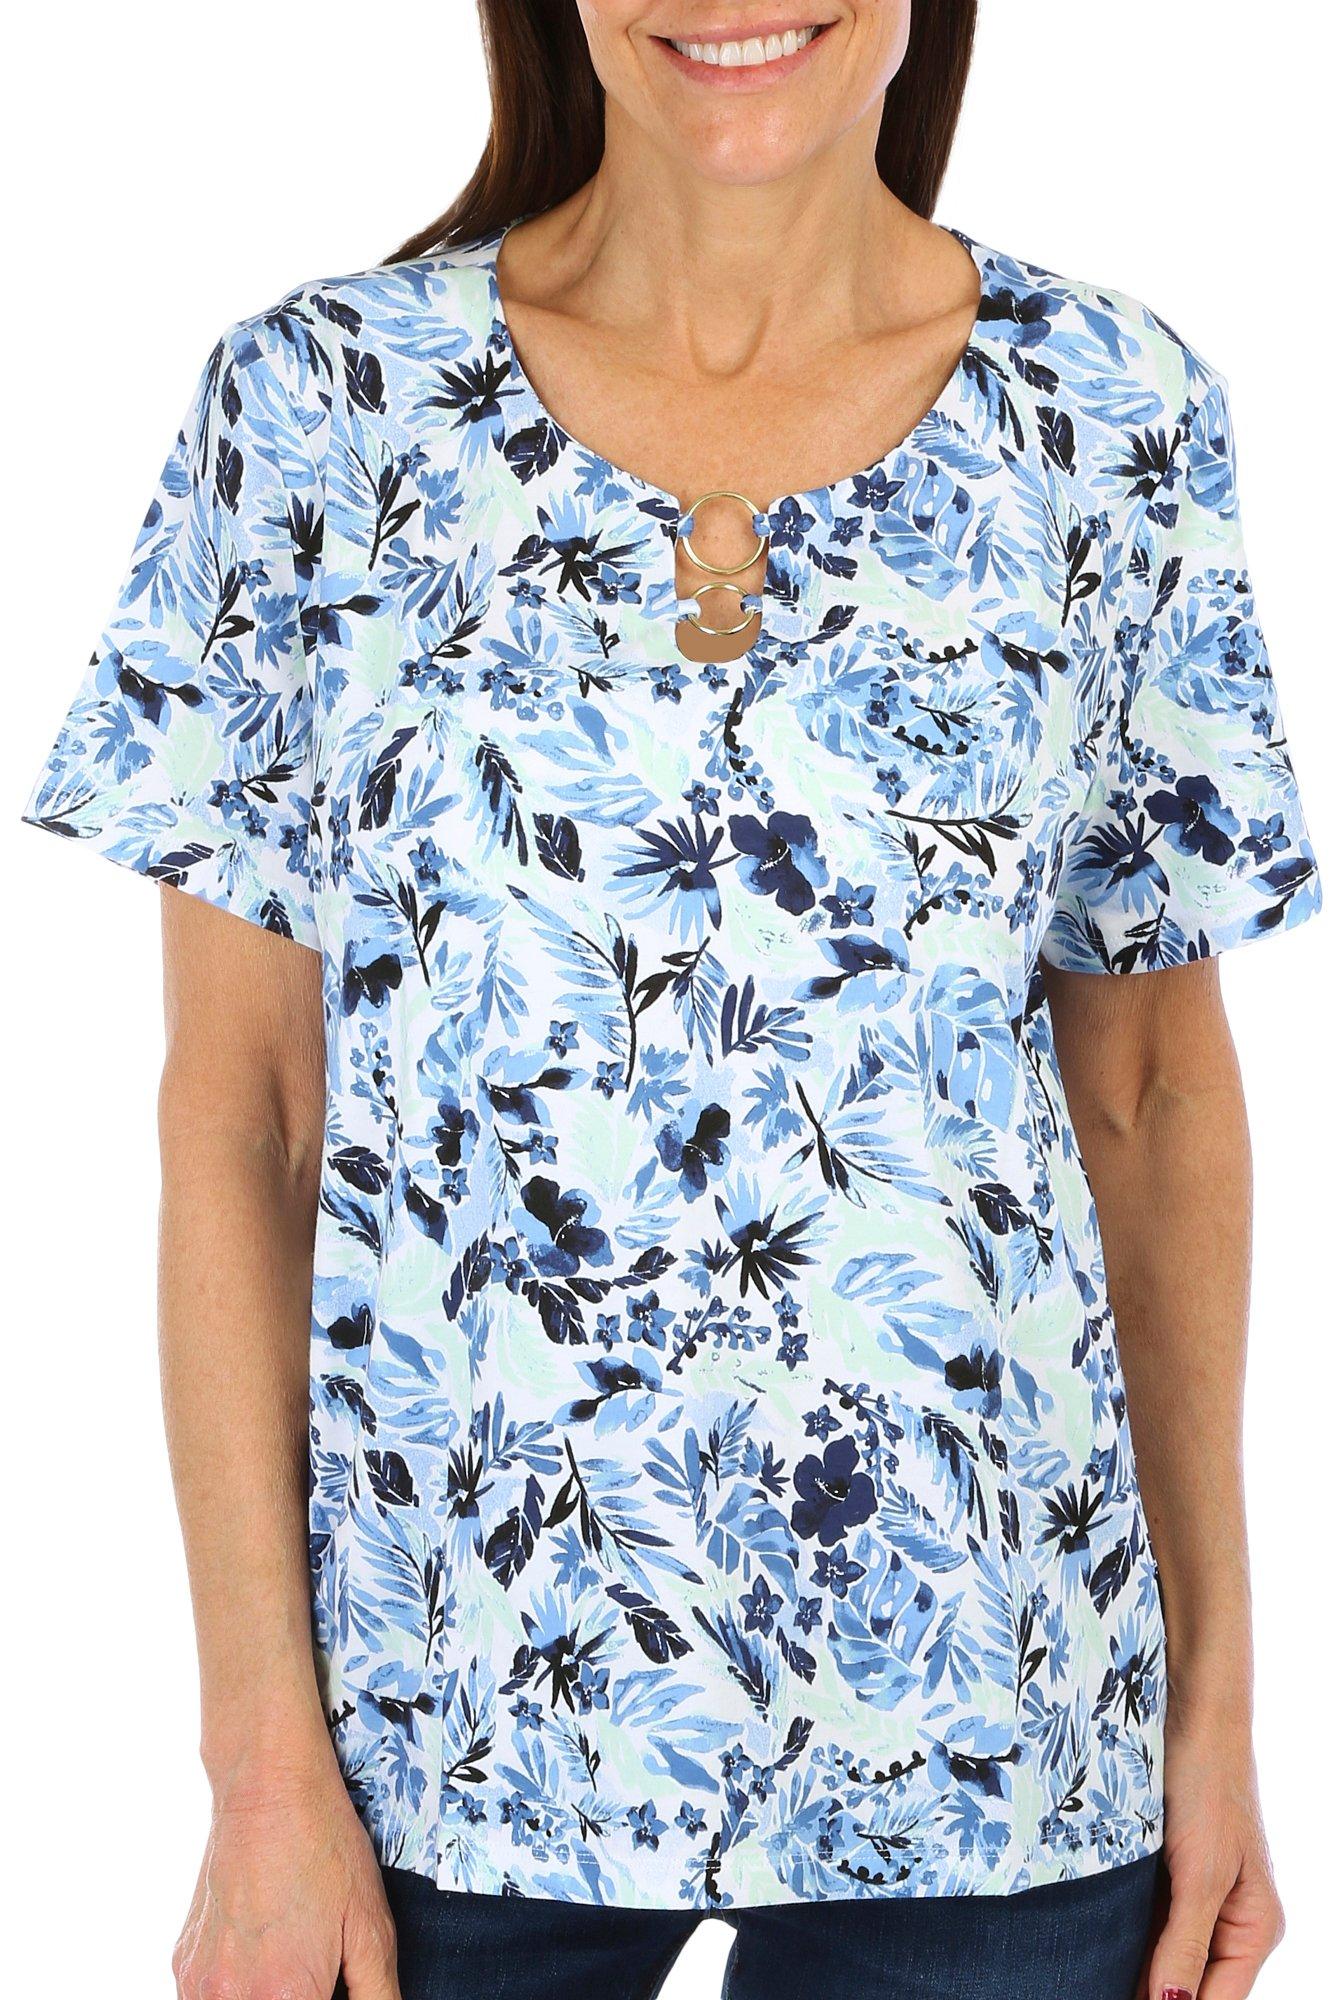 Coral Bay Petite Floral O-Ring Keyhole Short Sleeve